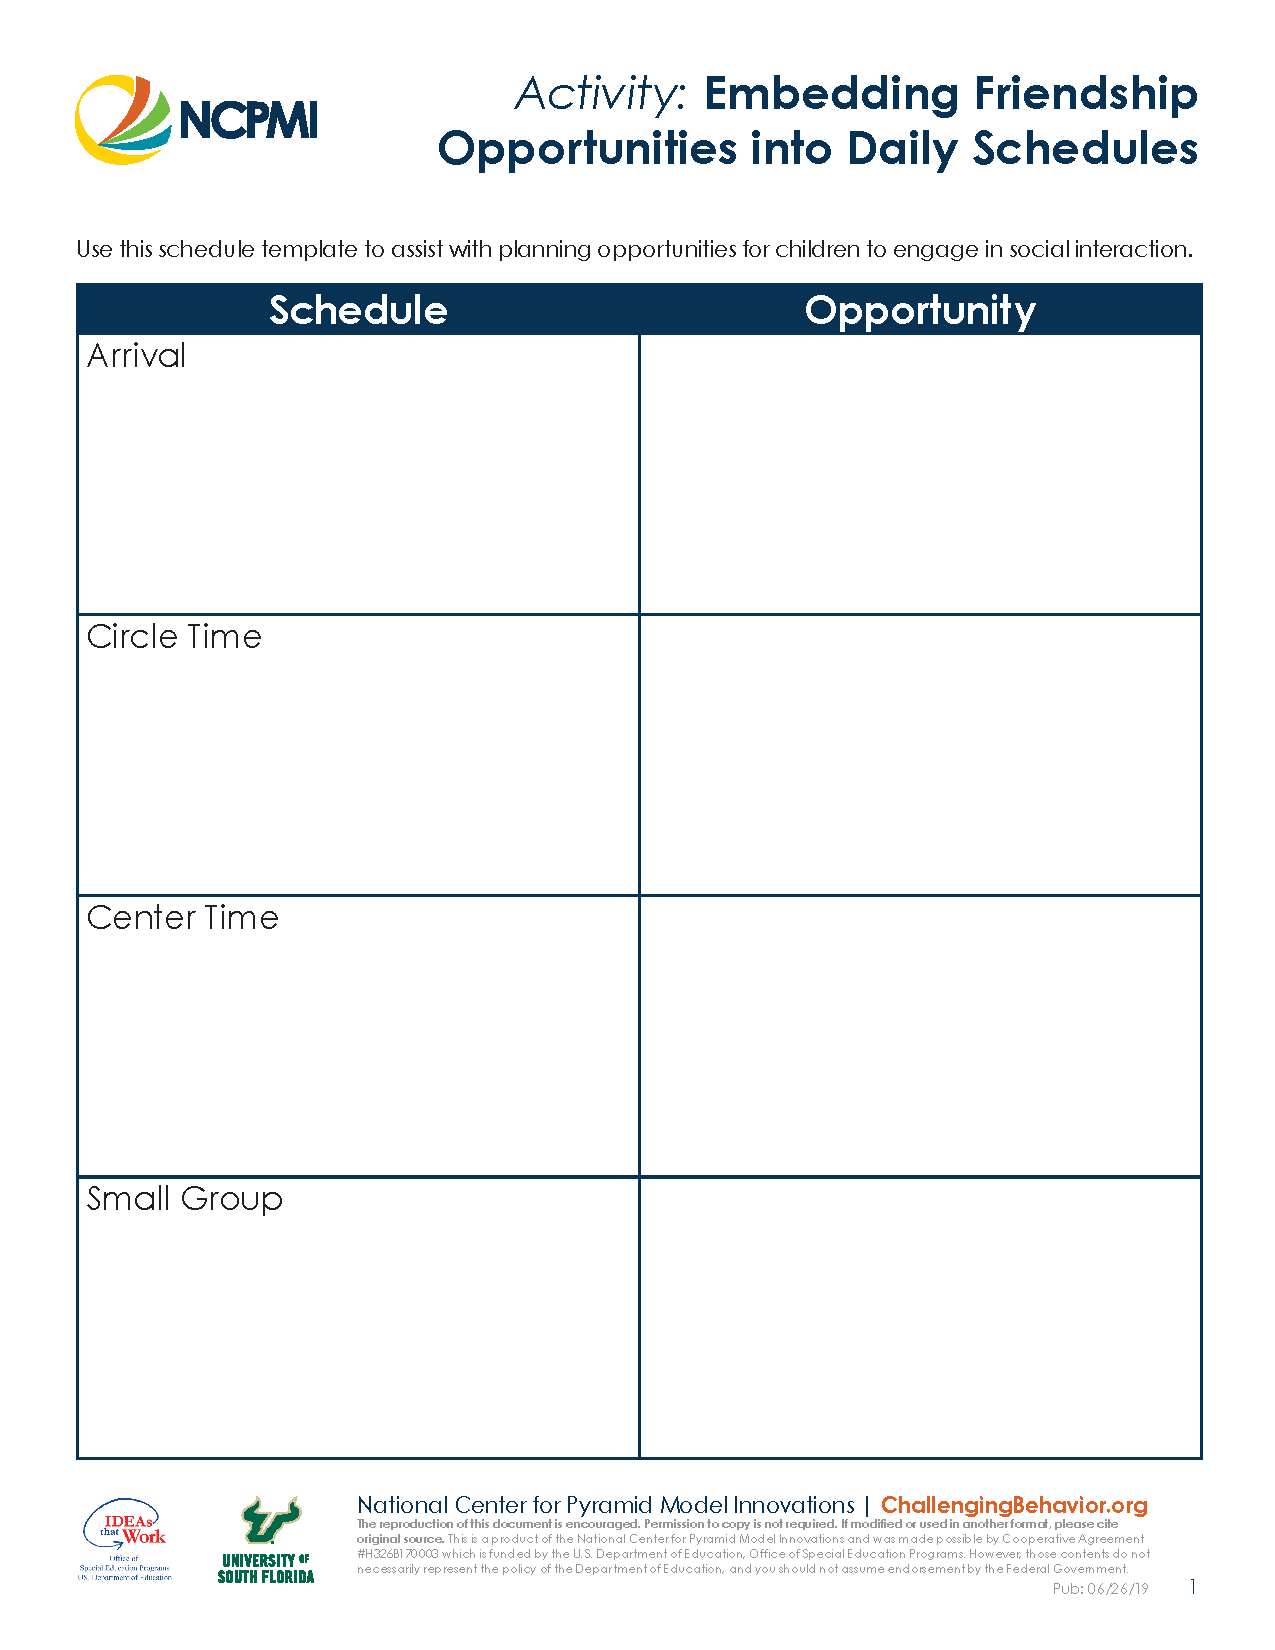 Embedding Friendship Opportunities into Daily Schedules